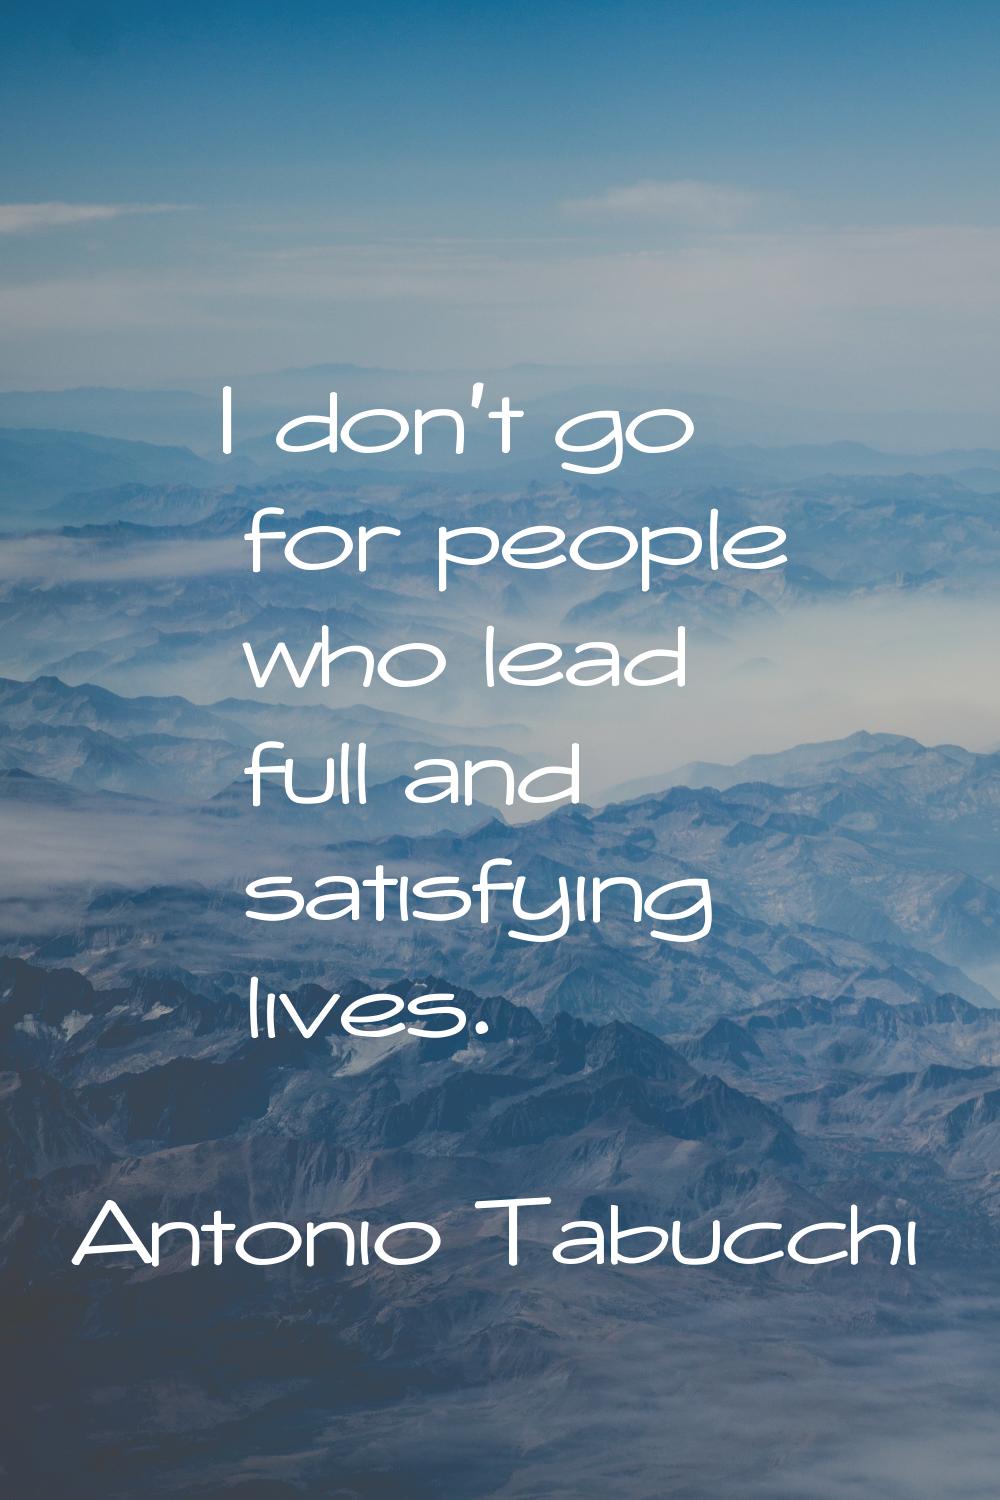 I don't go for people who lead full and satisfying lives.